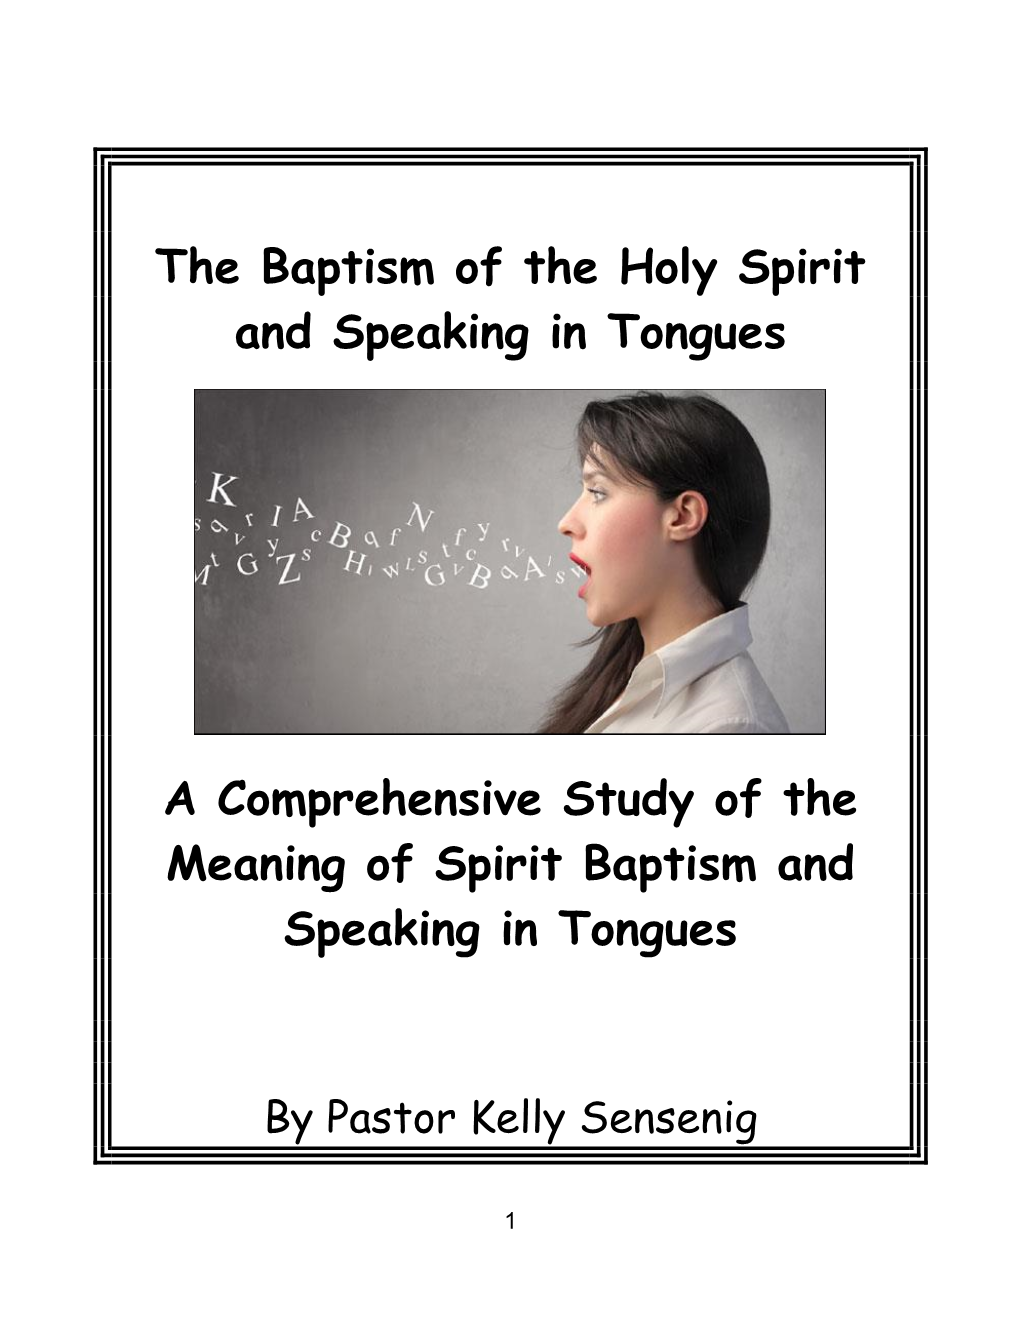 The Baptism of the Holy Spirit and Speaking in Tongues As a Crisis Experience, Which Occurred After One’S Conversion